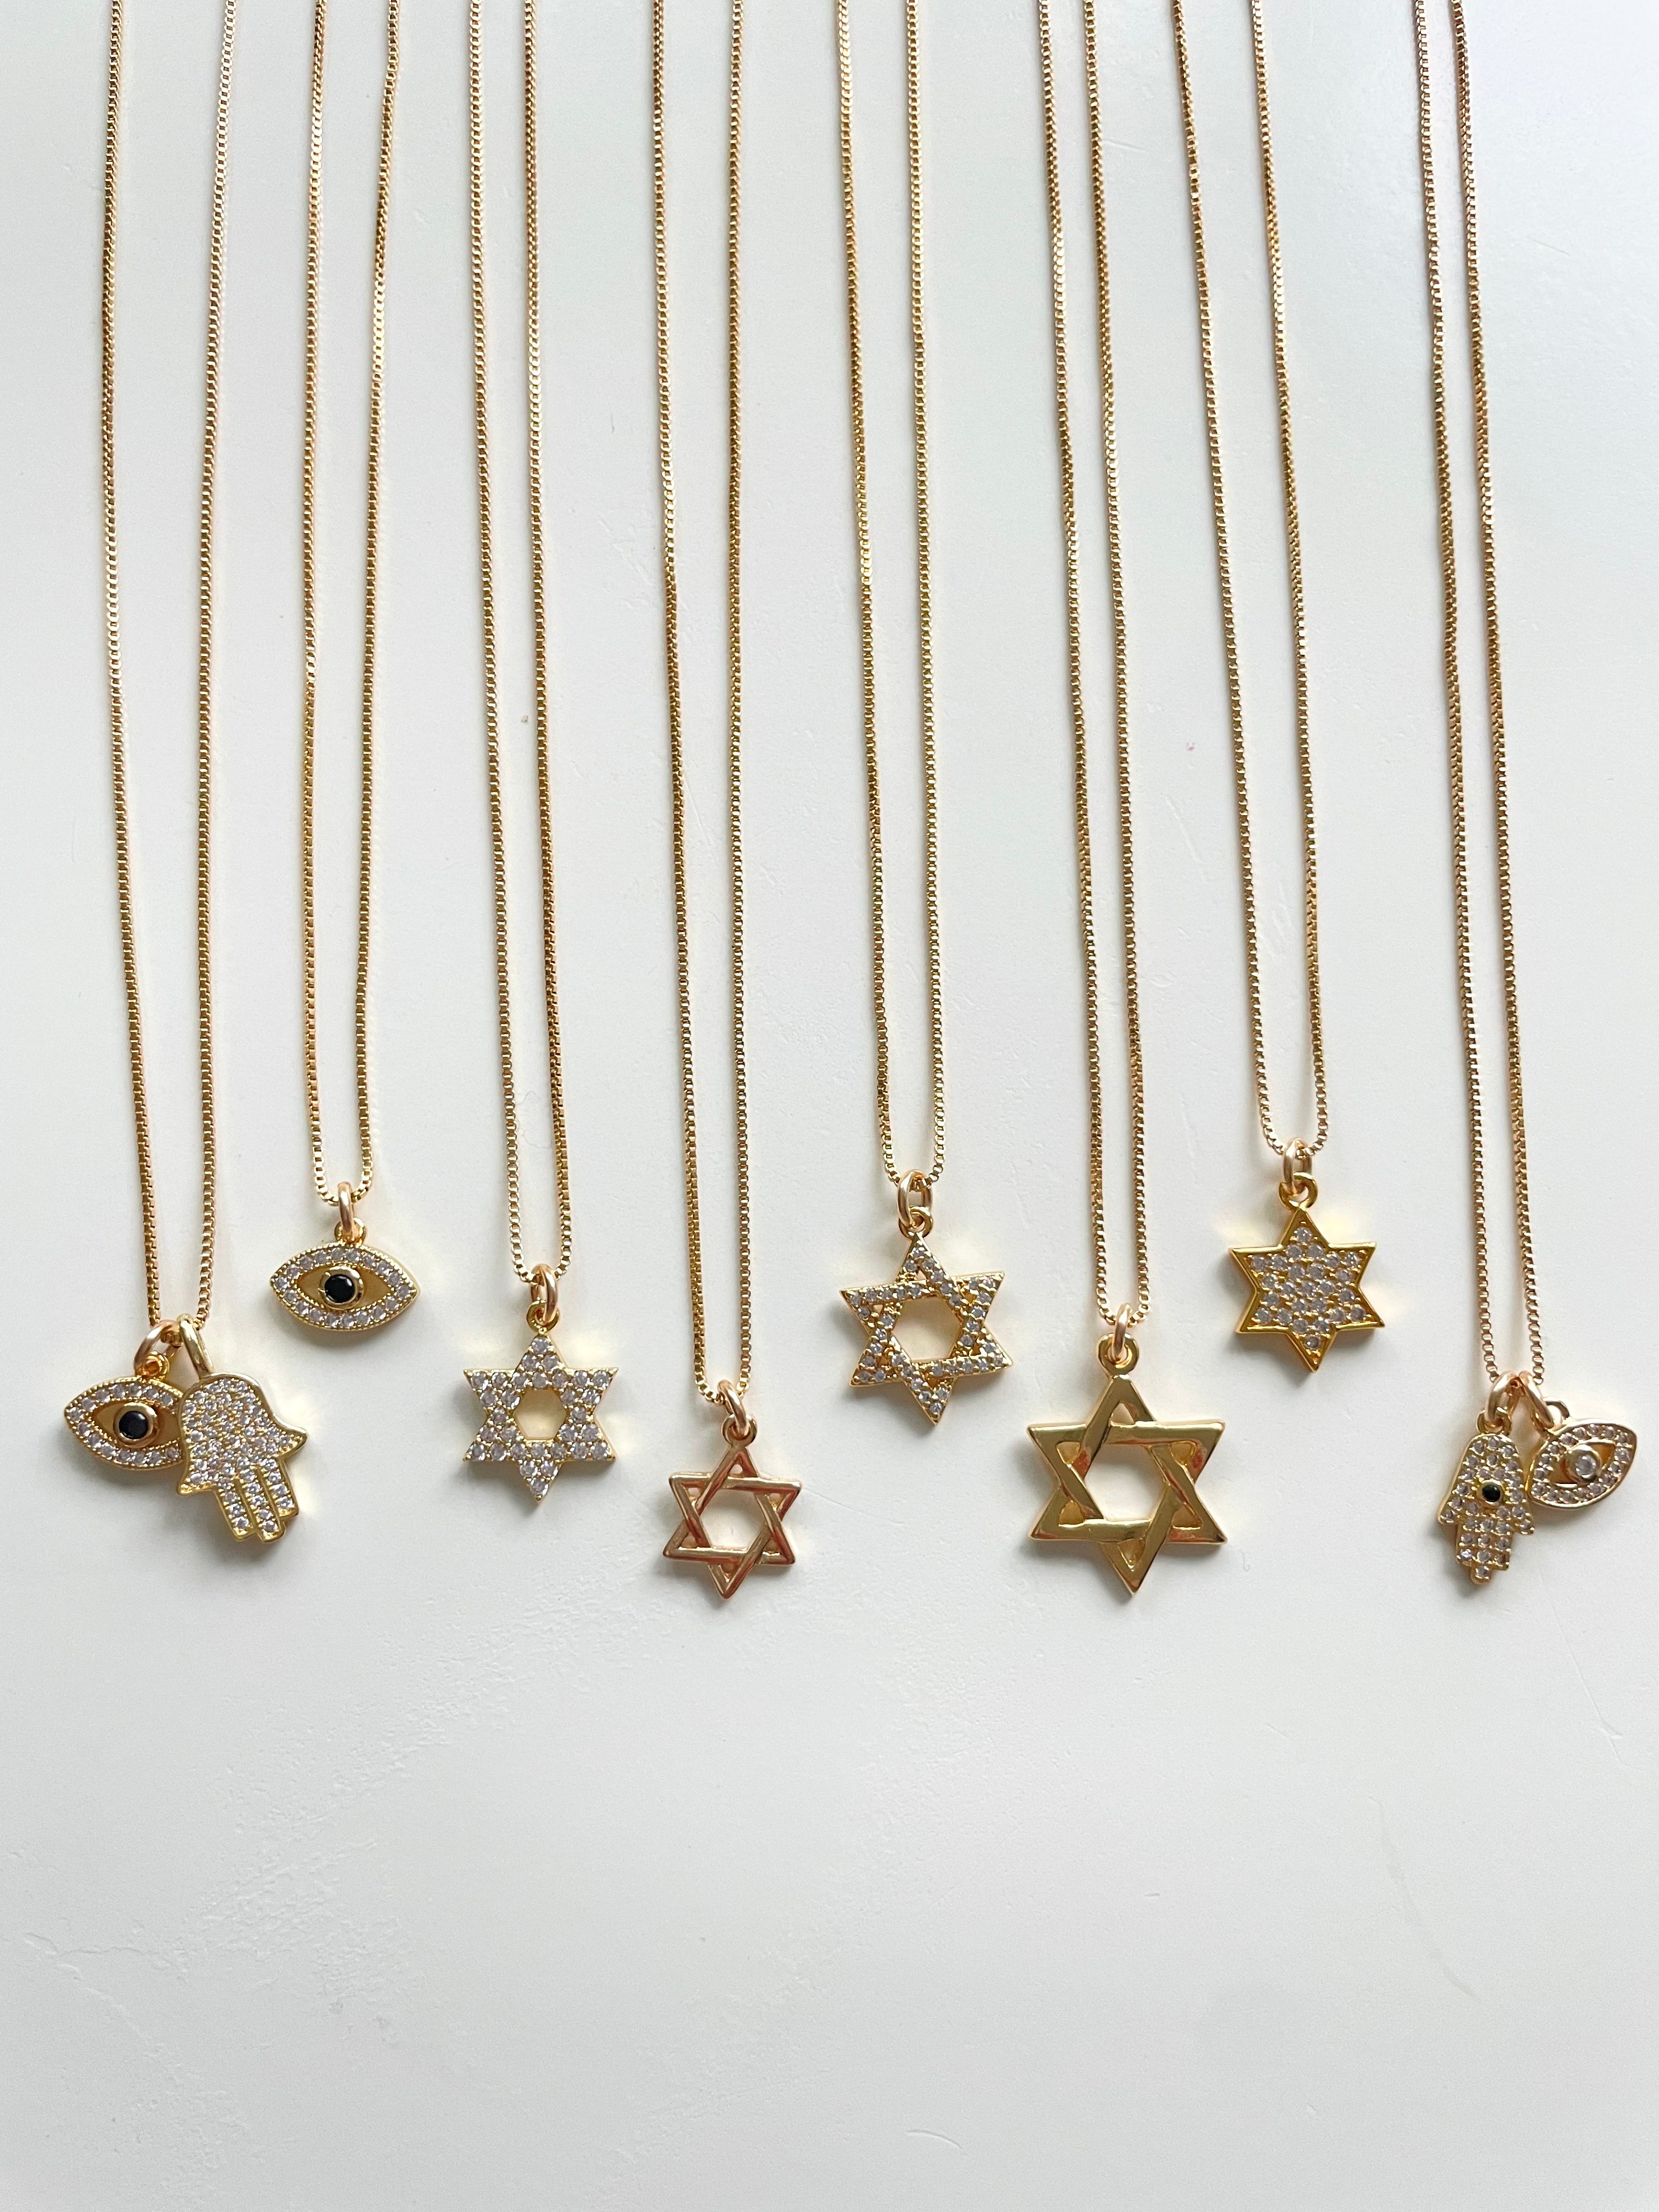 Evil Eye and Hamsa Necklaces -  Benefitting Israeli’s frontline workers to aid victims of war